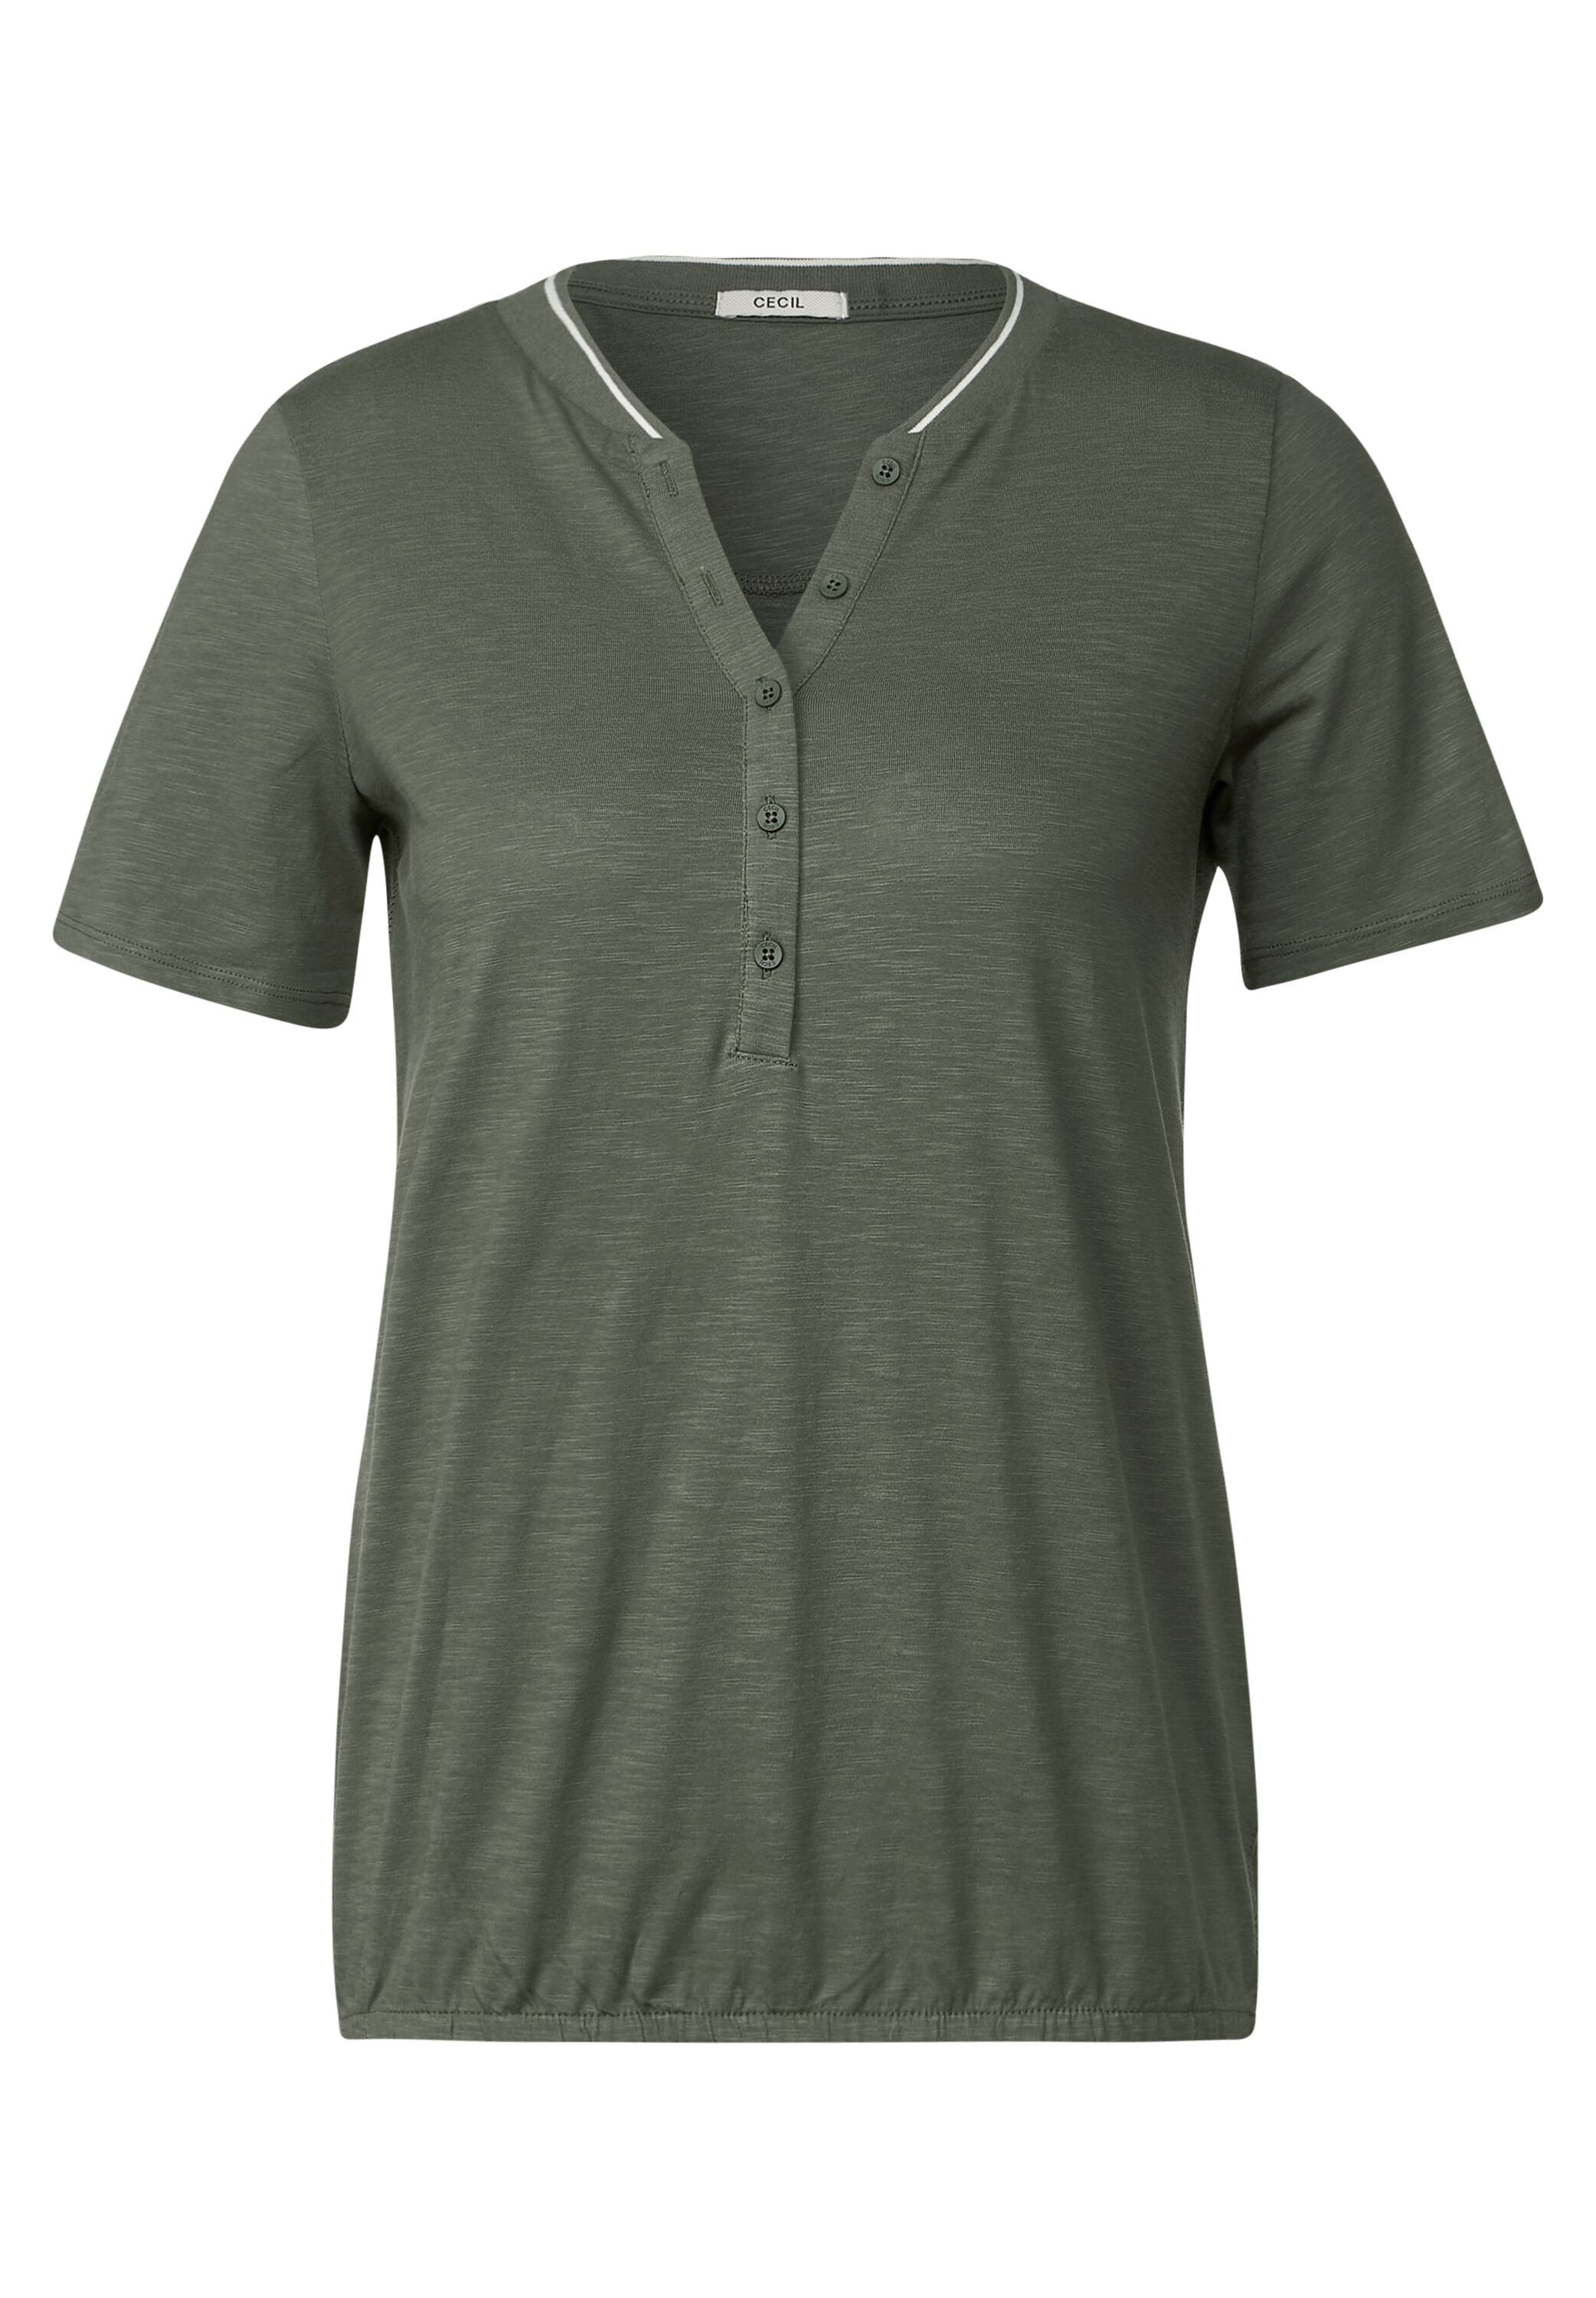 Cecil 3/4-Arm-Shirt in desert Unifarbe olive green